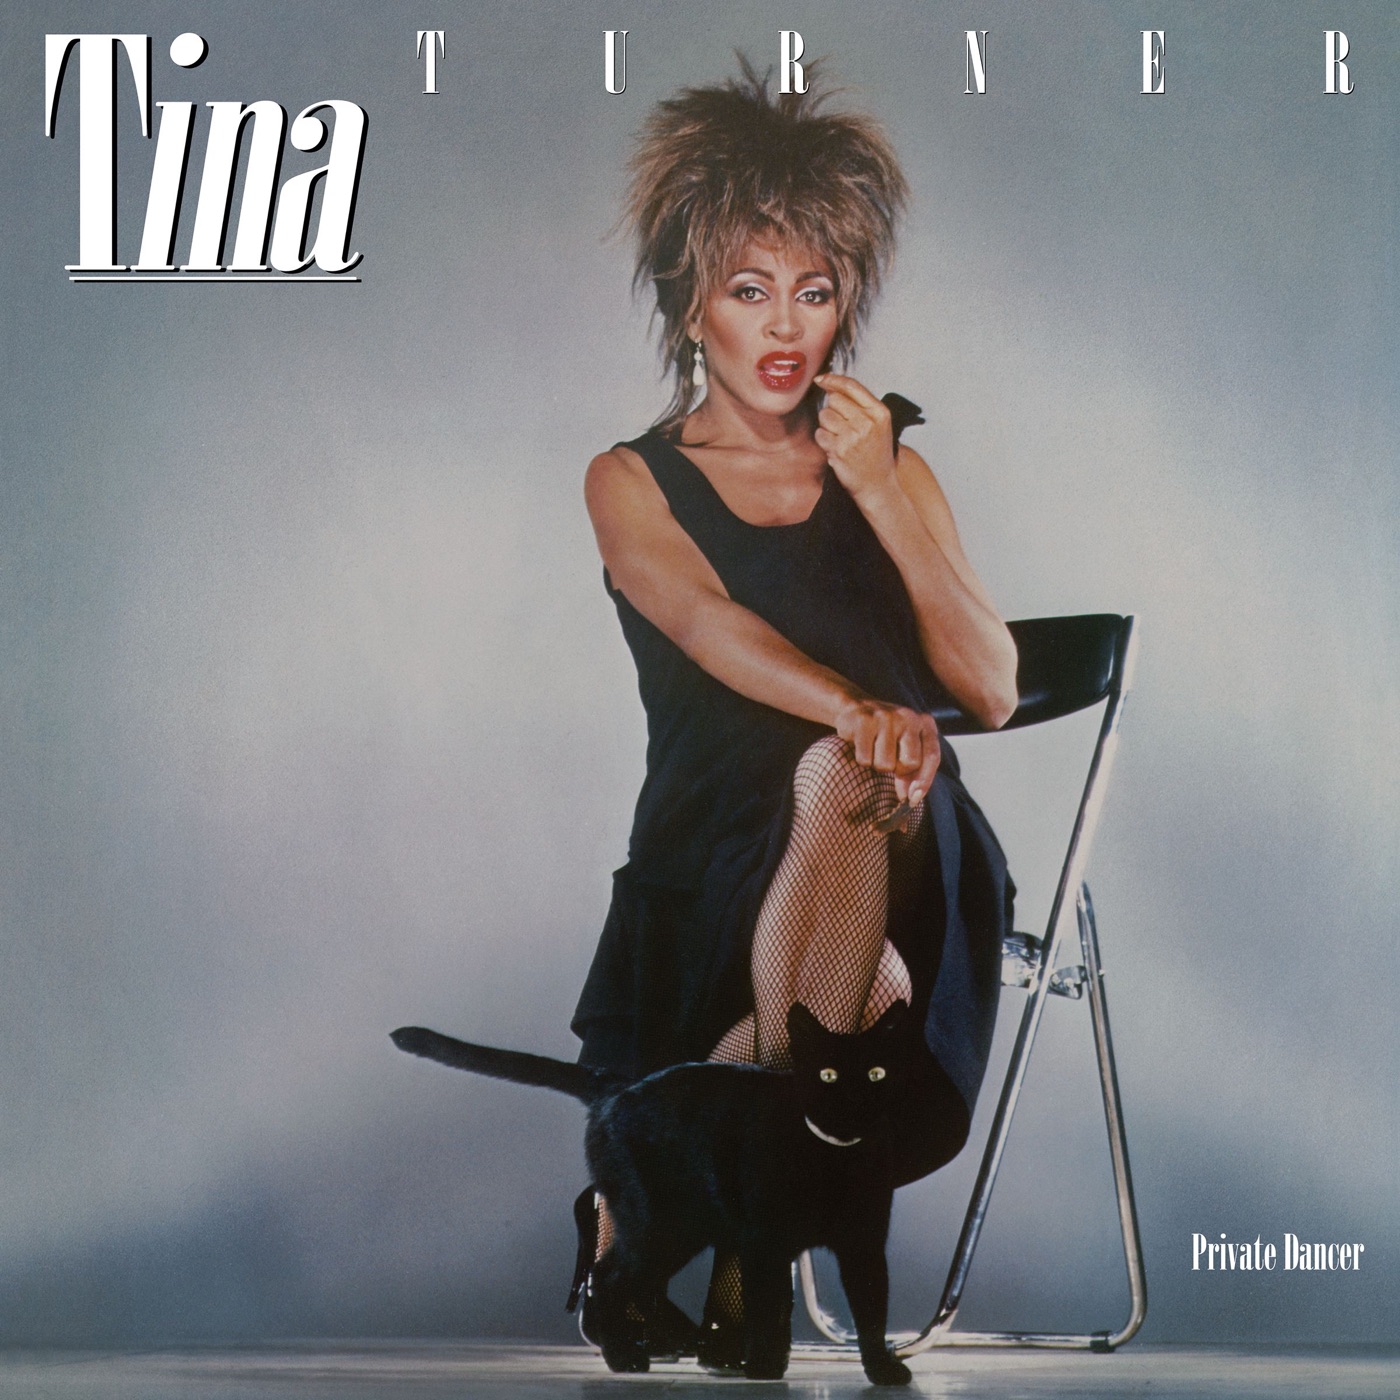 Private Dancer (30th Anniversary Issue) by Tina Turner